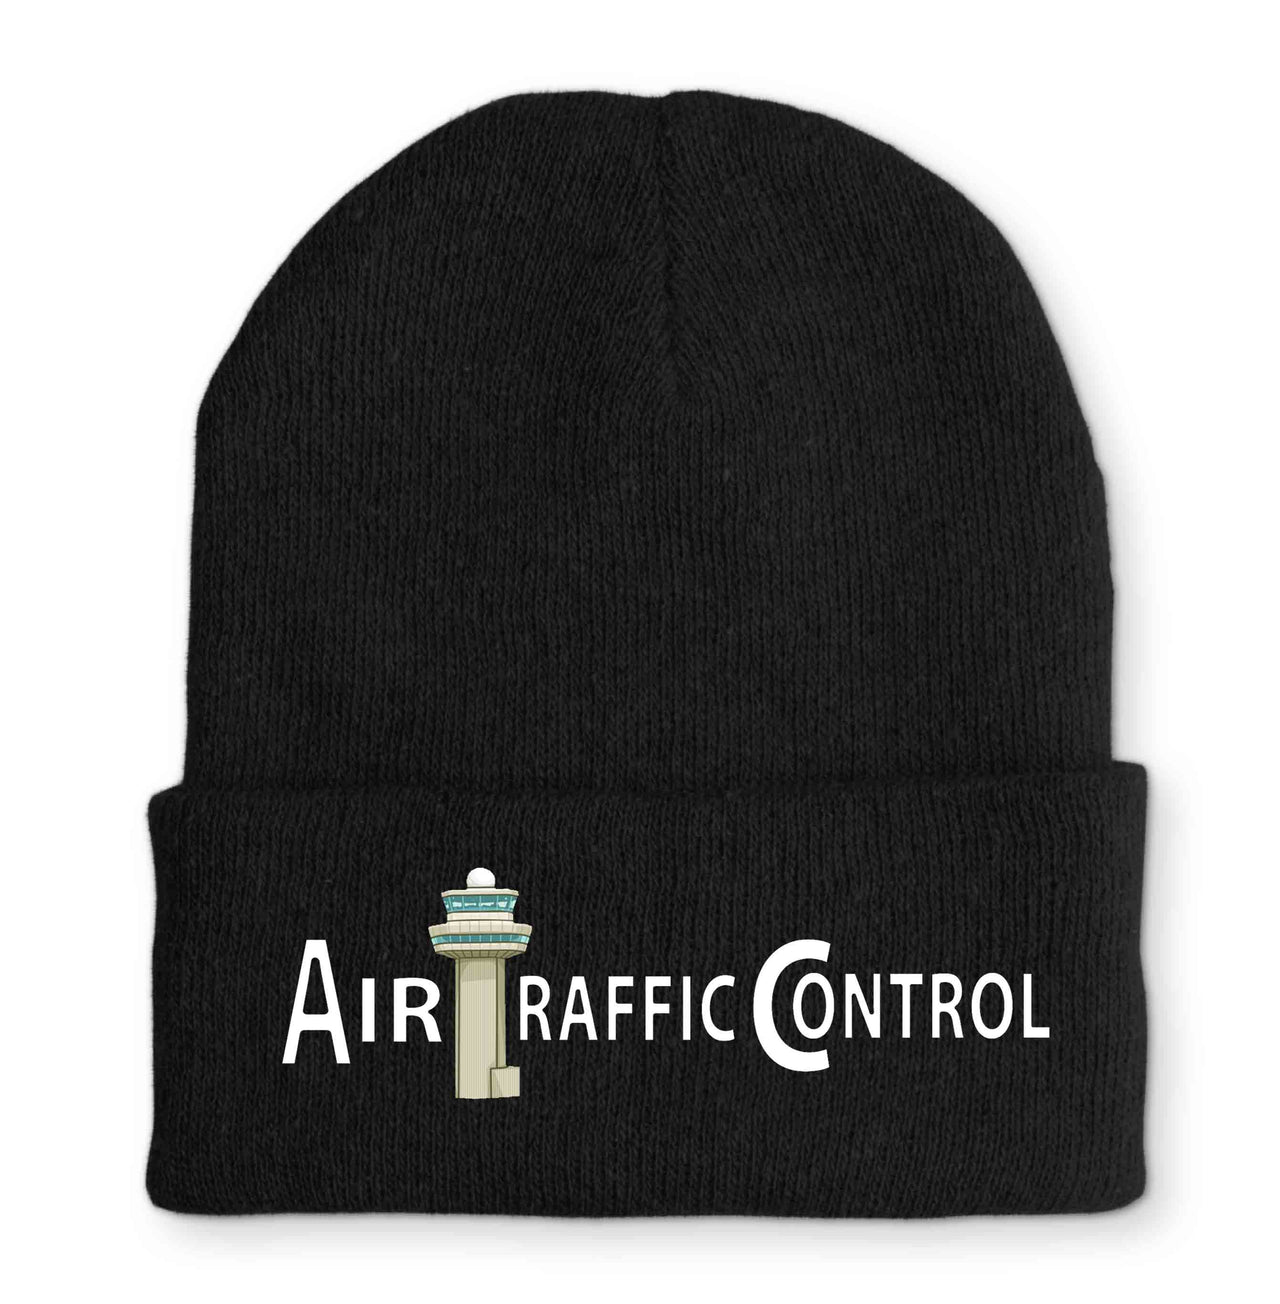 Air Traffic Control Embroidered Beanies